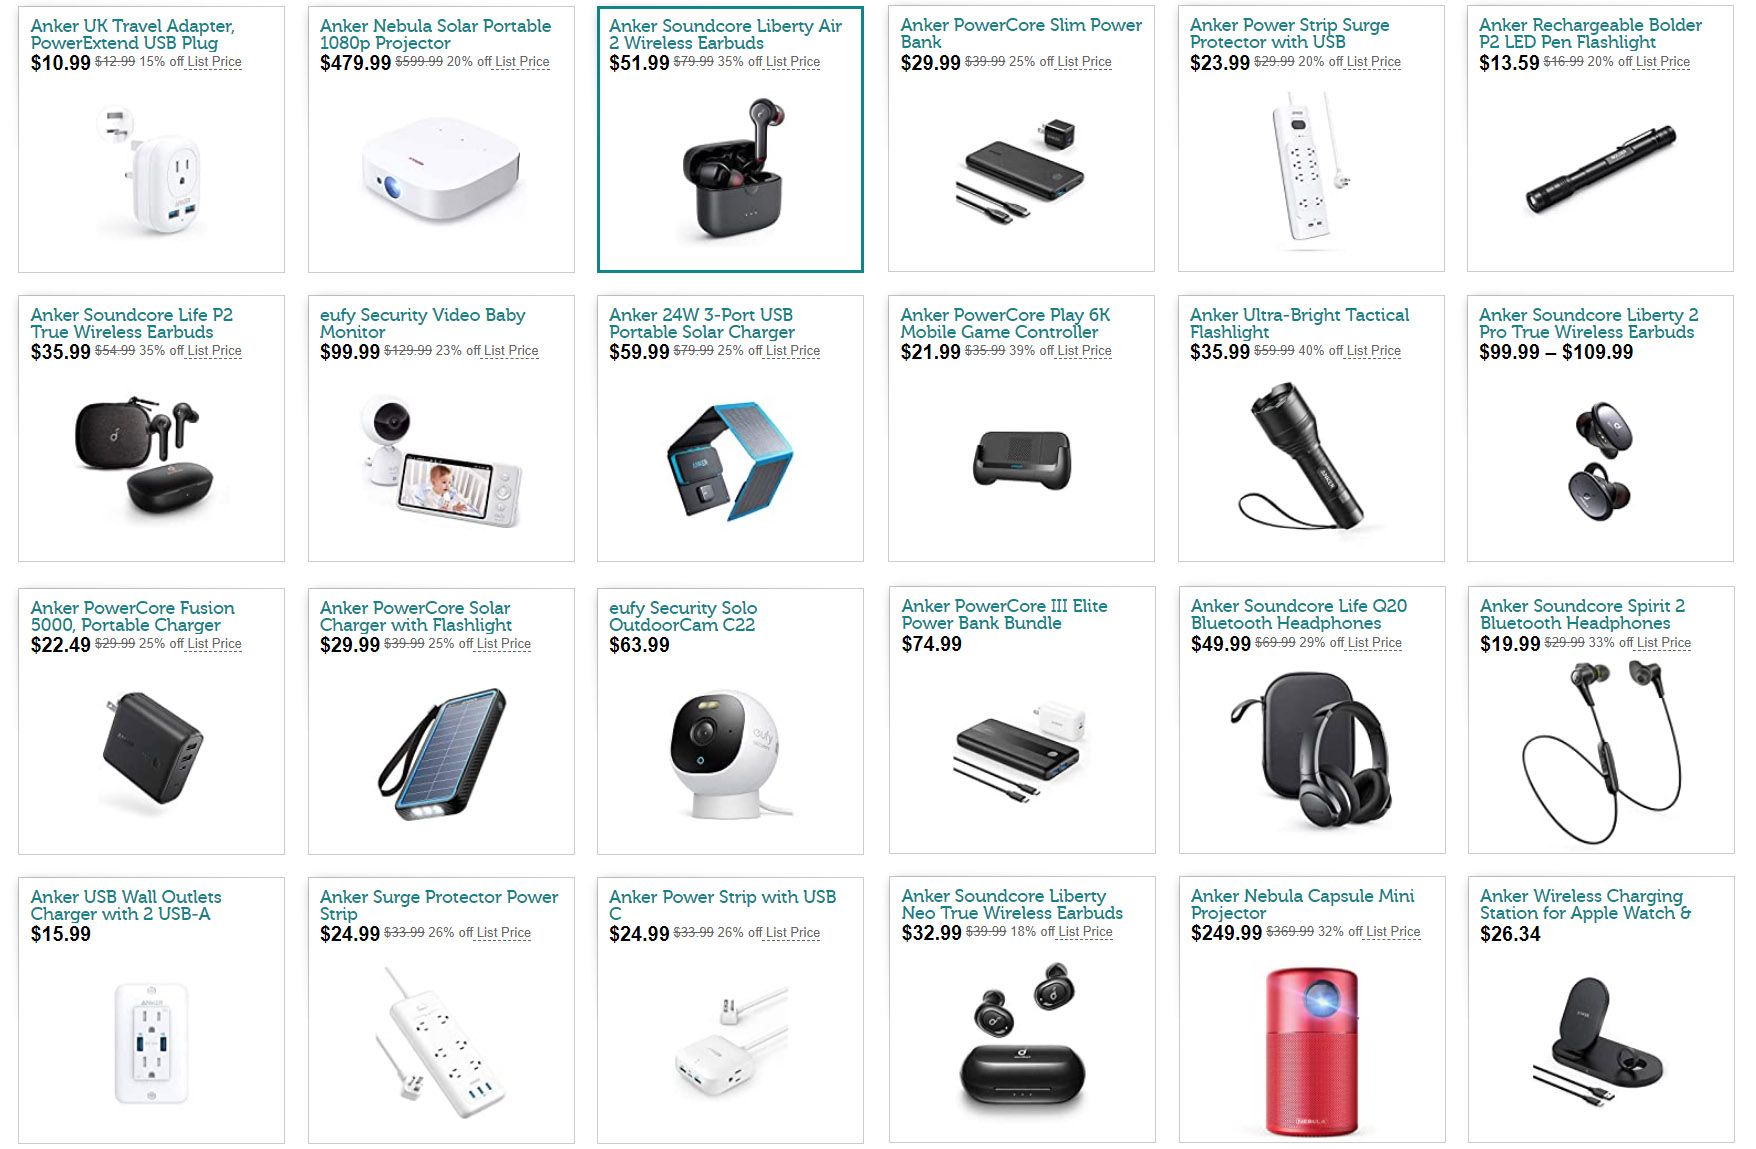 Check out a grab bag of deals on most popular gadgets